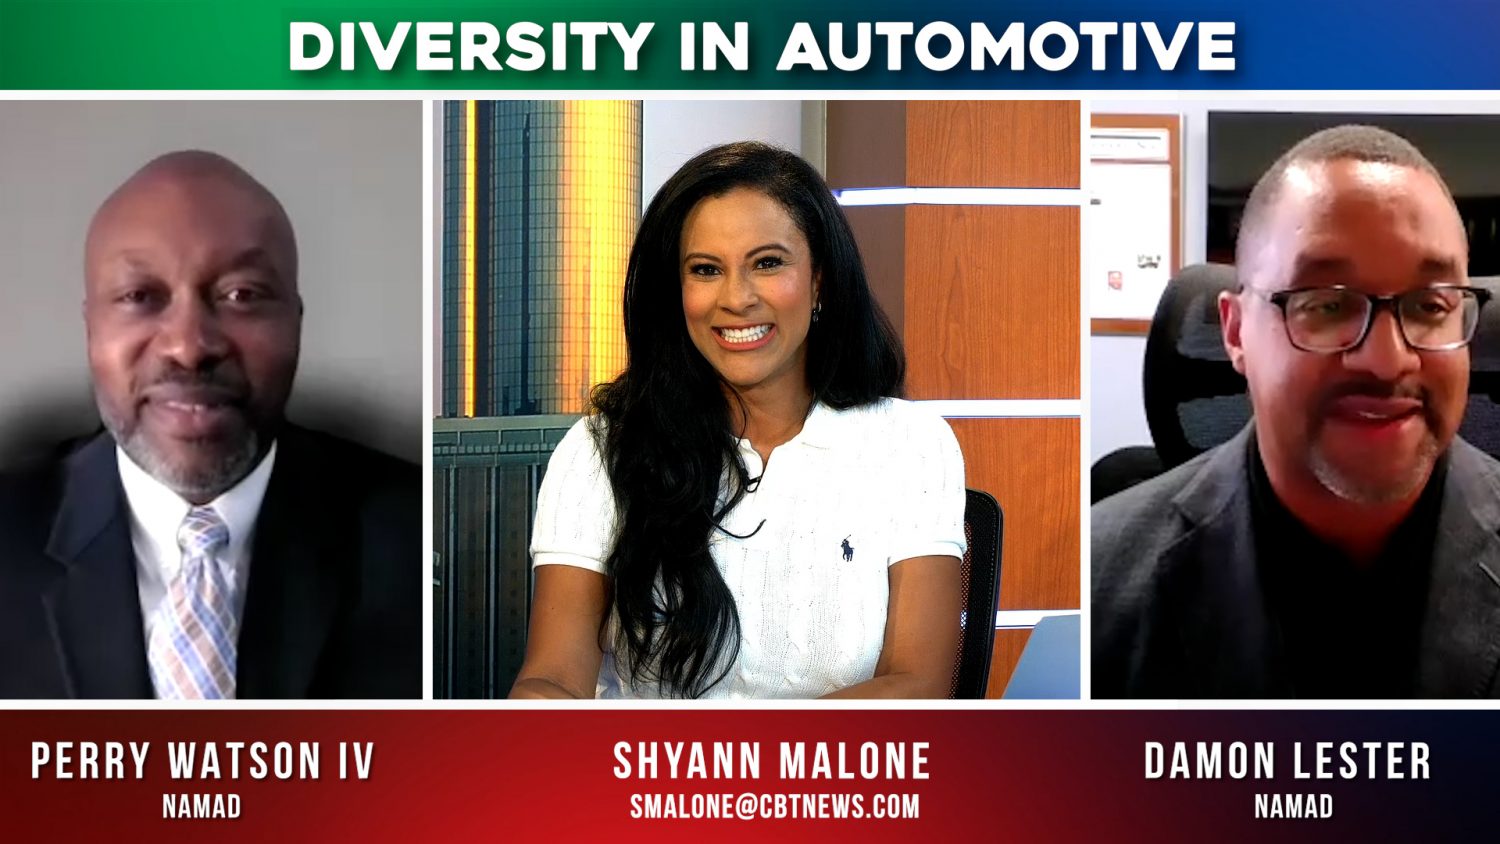 Perry Watson IV and Damon Lester join Diversity in Automotive to discuss how NAMAD drives inclusivity in and outside the dealership.